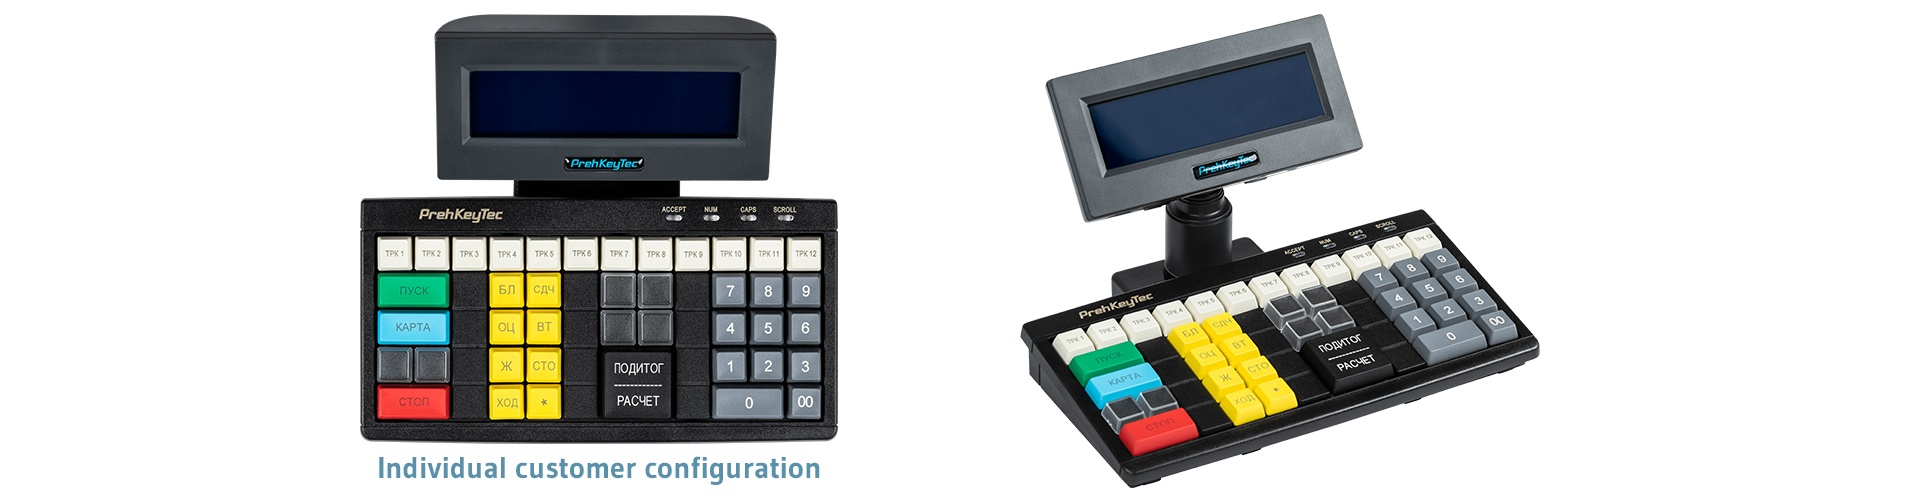 Cash Register Keyboard with Display